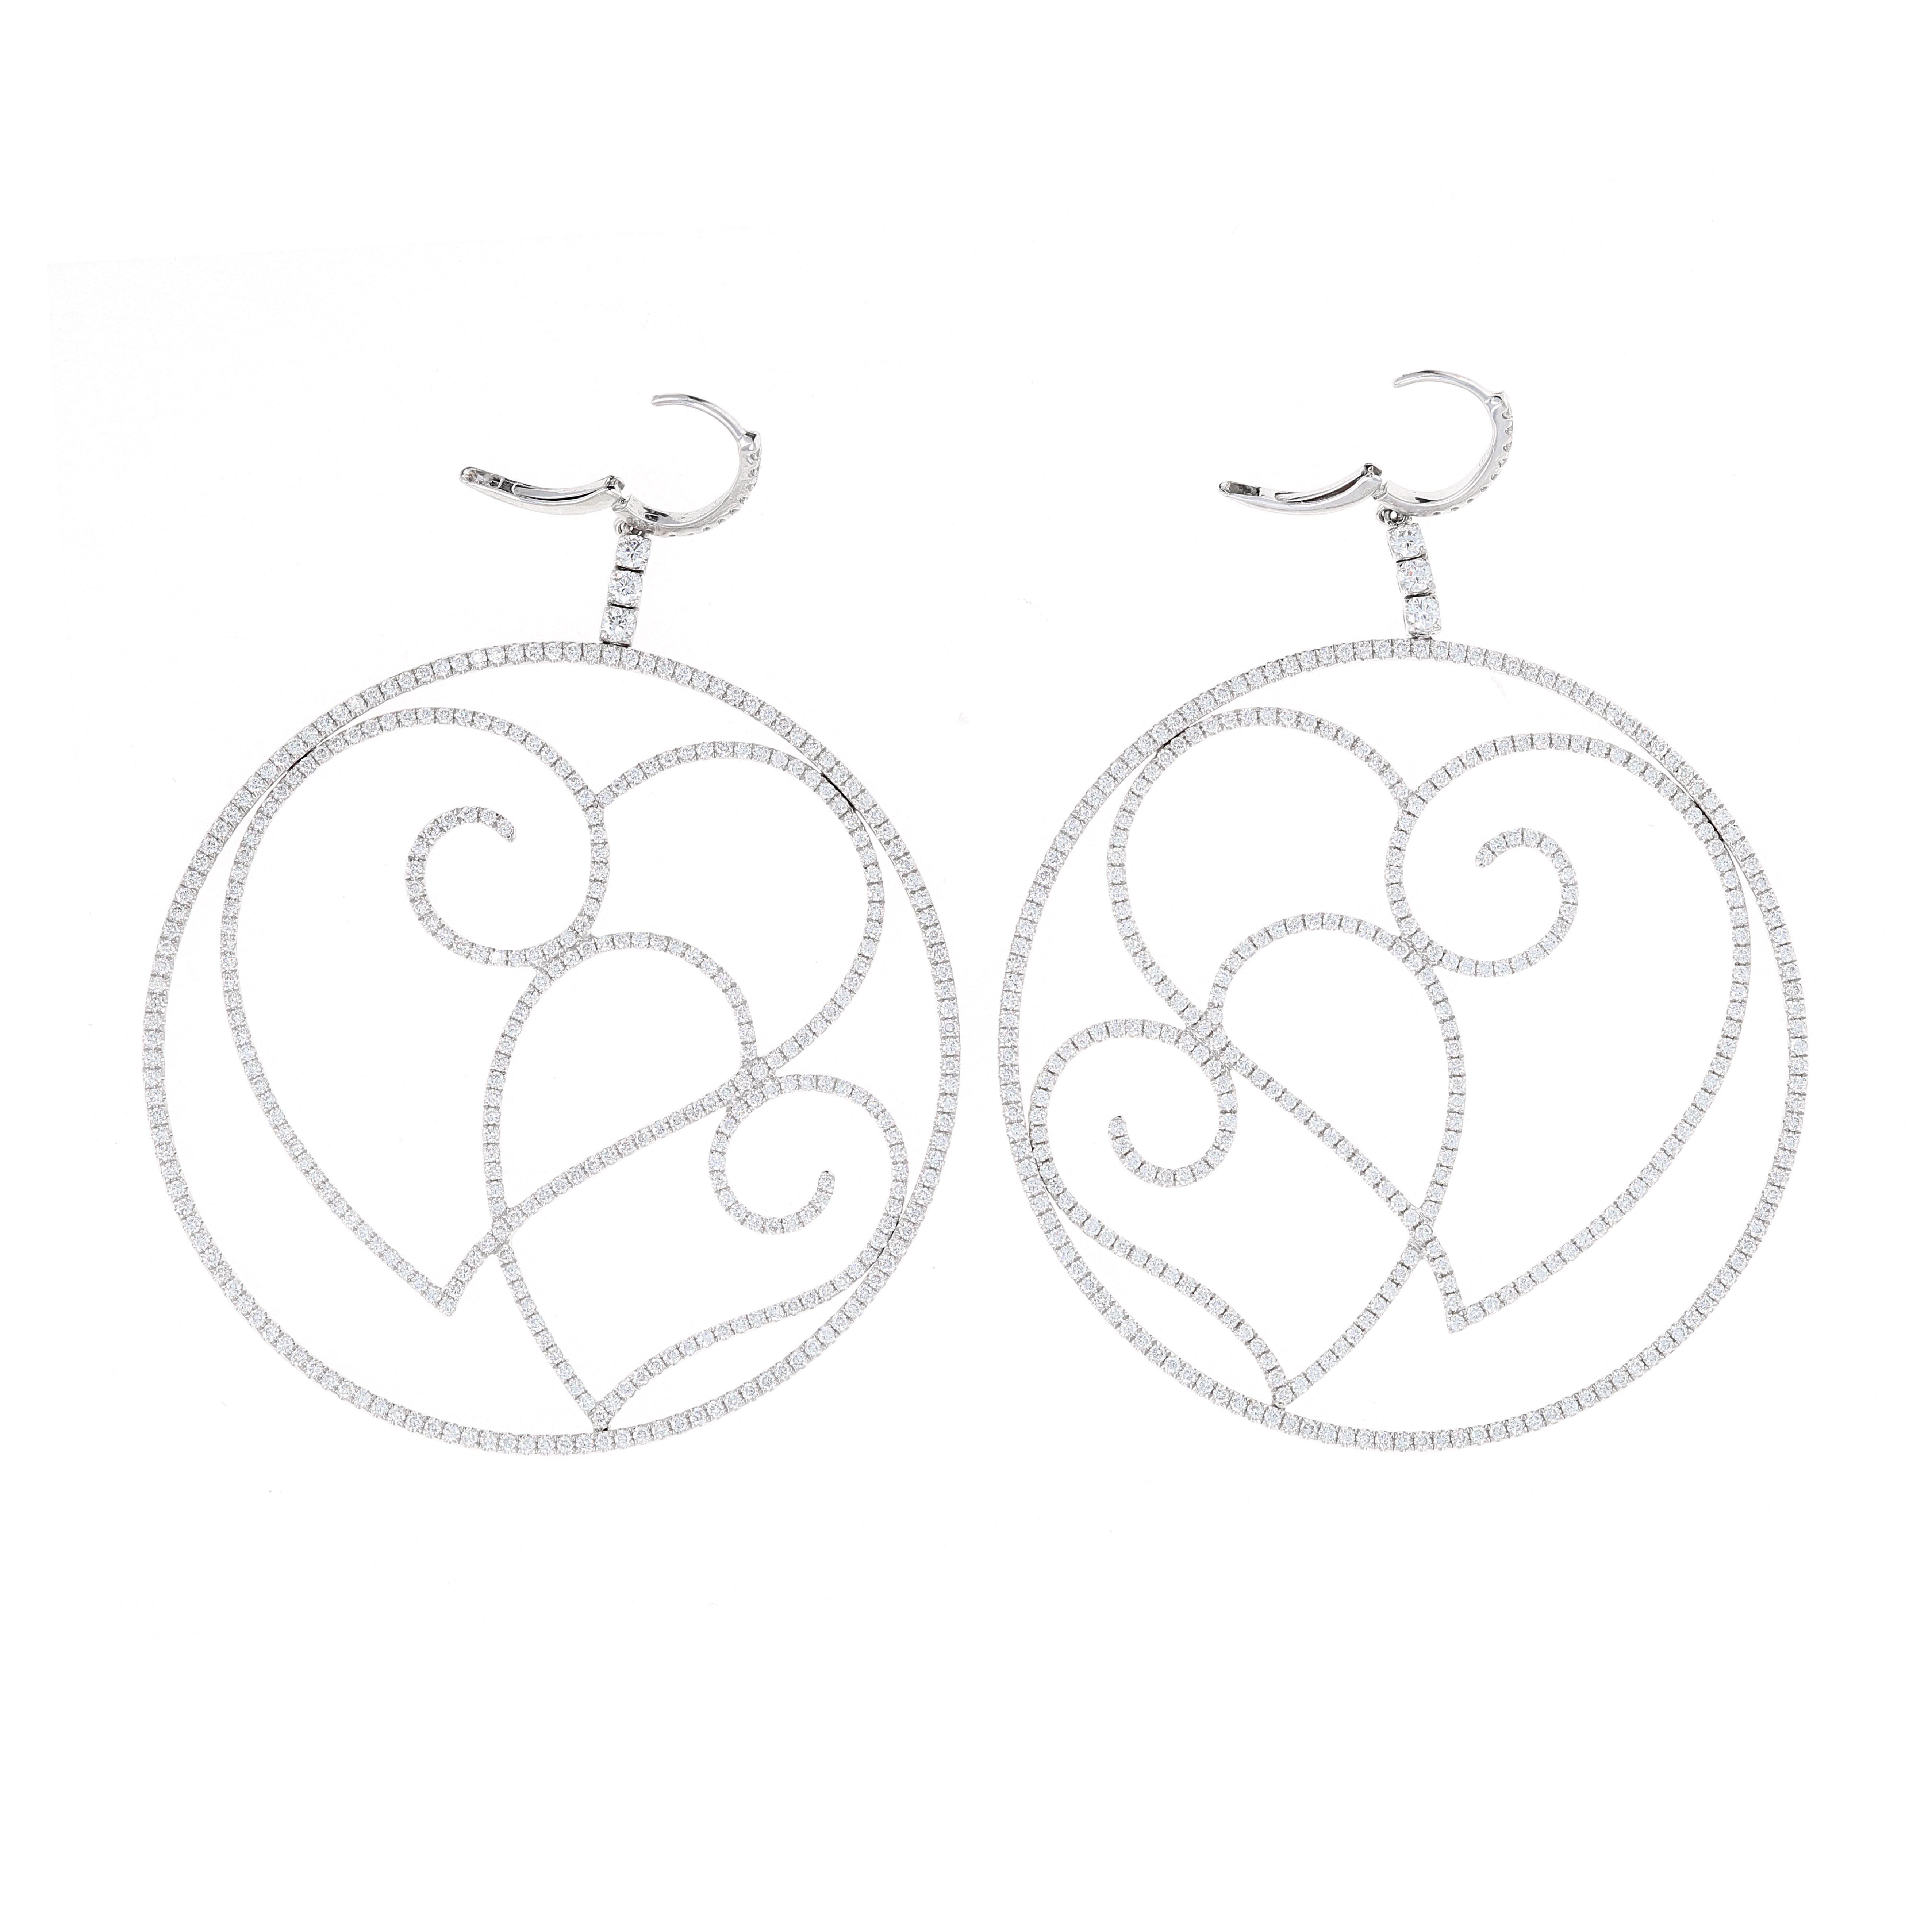 These large diamond hoop earrings are the perfect Mother's Day gift. The earrings are made in 18 karat white gold   and dangle from a diamond hoop. The design showcases 2 side by side intertwined heart shapes. 
There are a total of 4.69 carats in